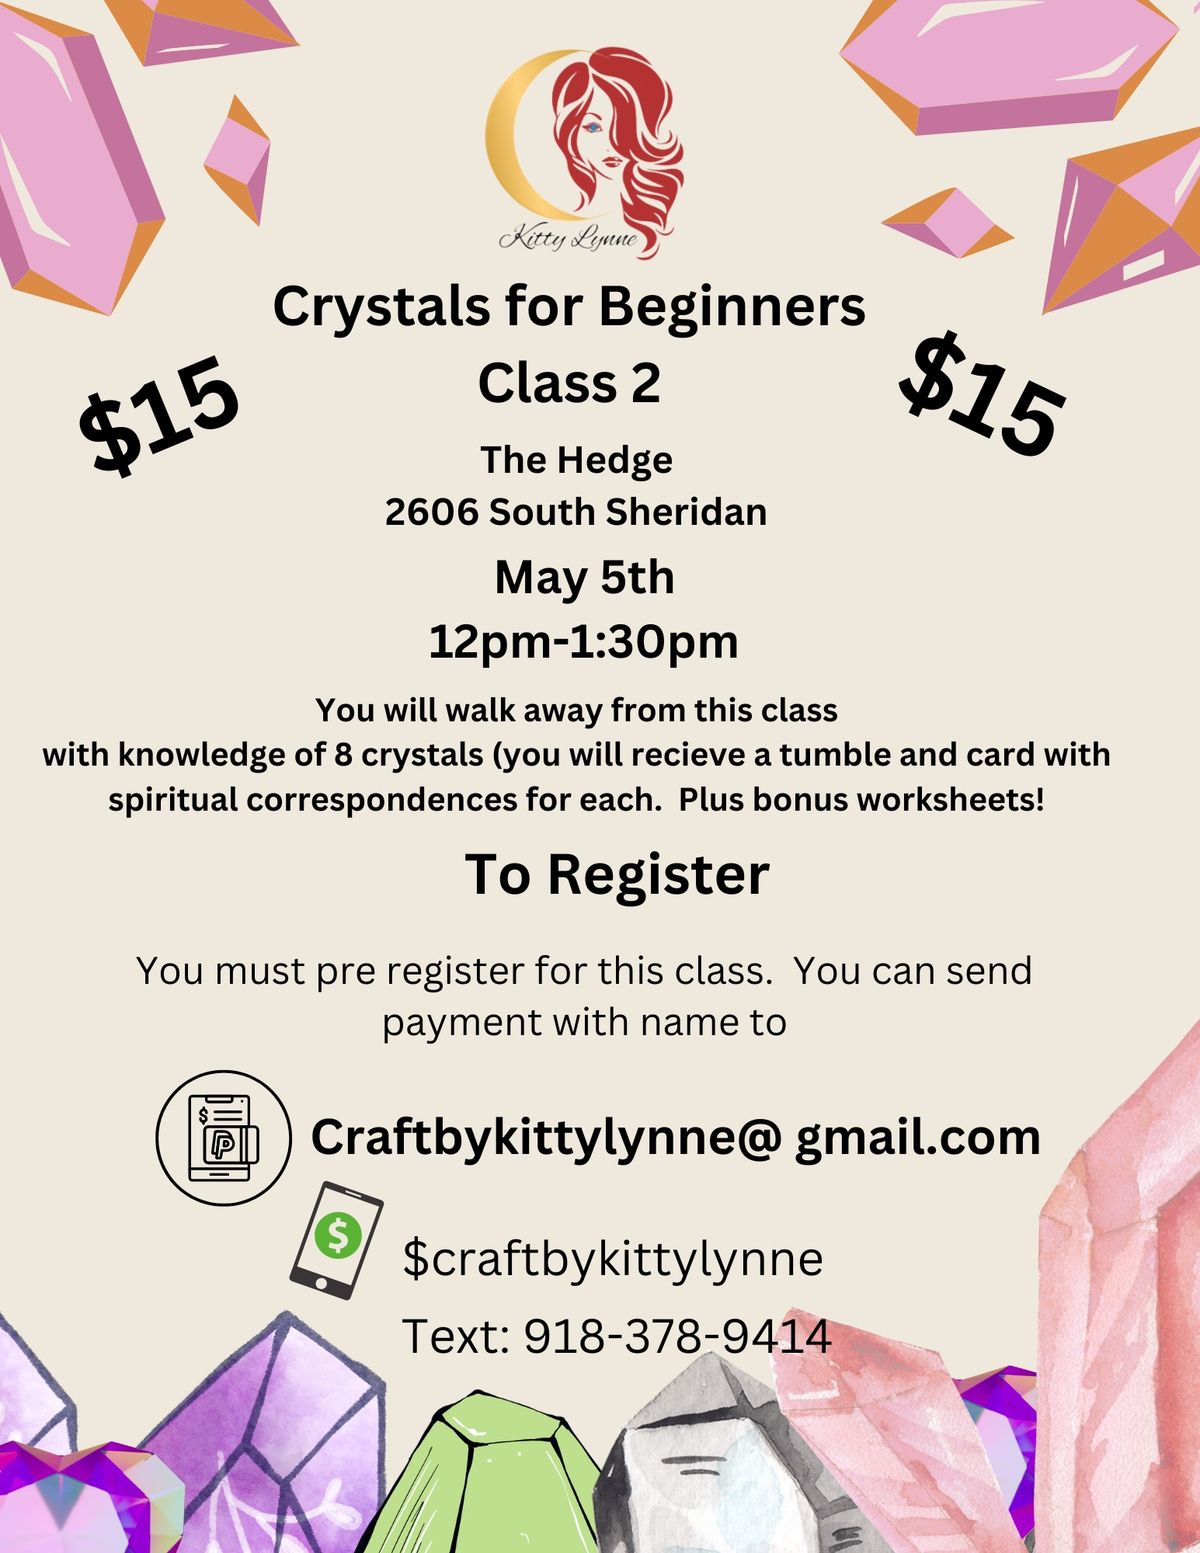 Crystals for beginners Class 2